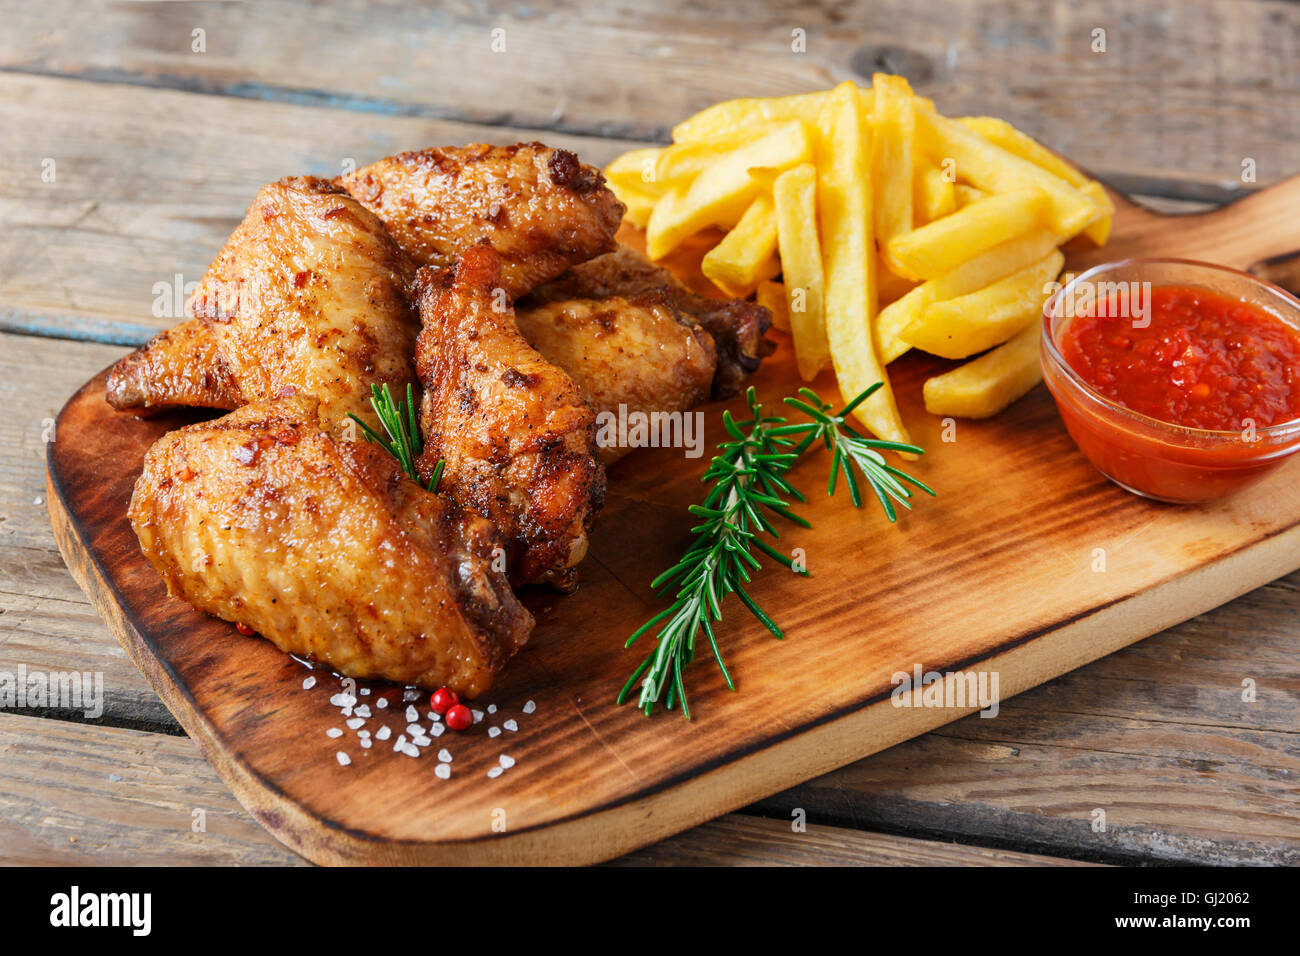 fried chicken wings french fries and sauce Stock Photo